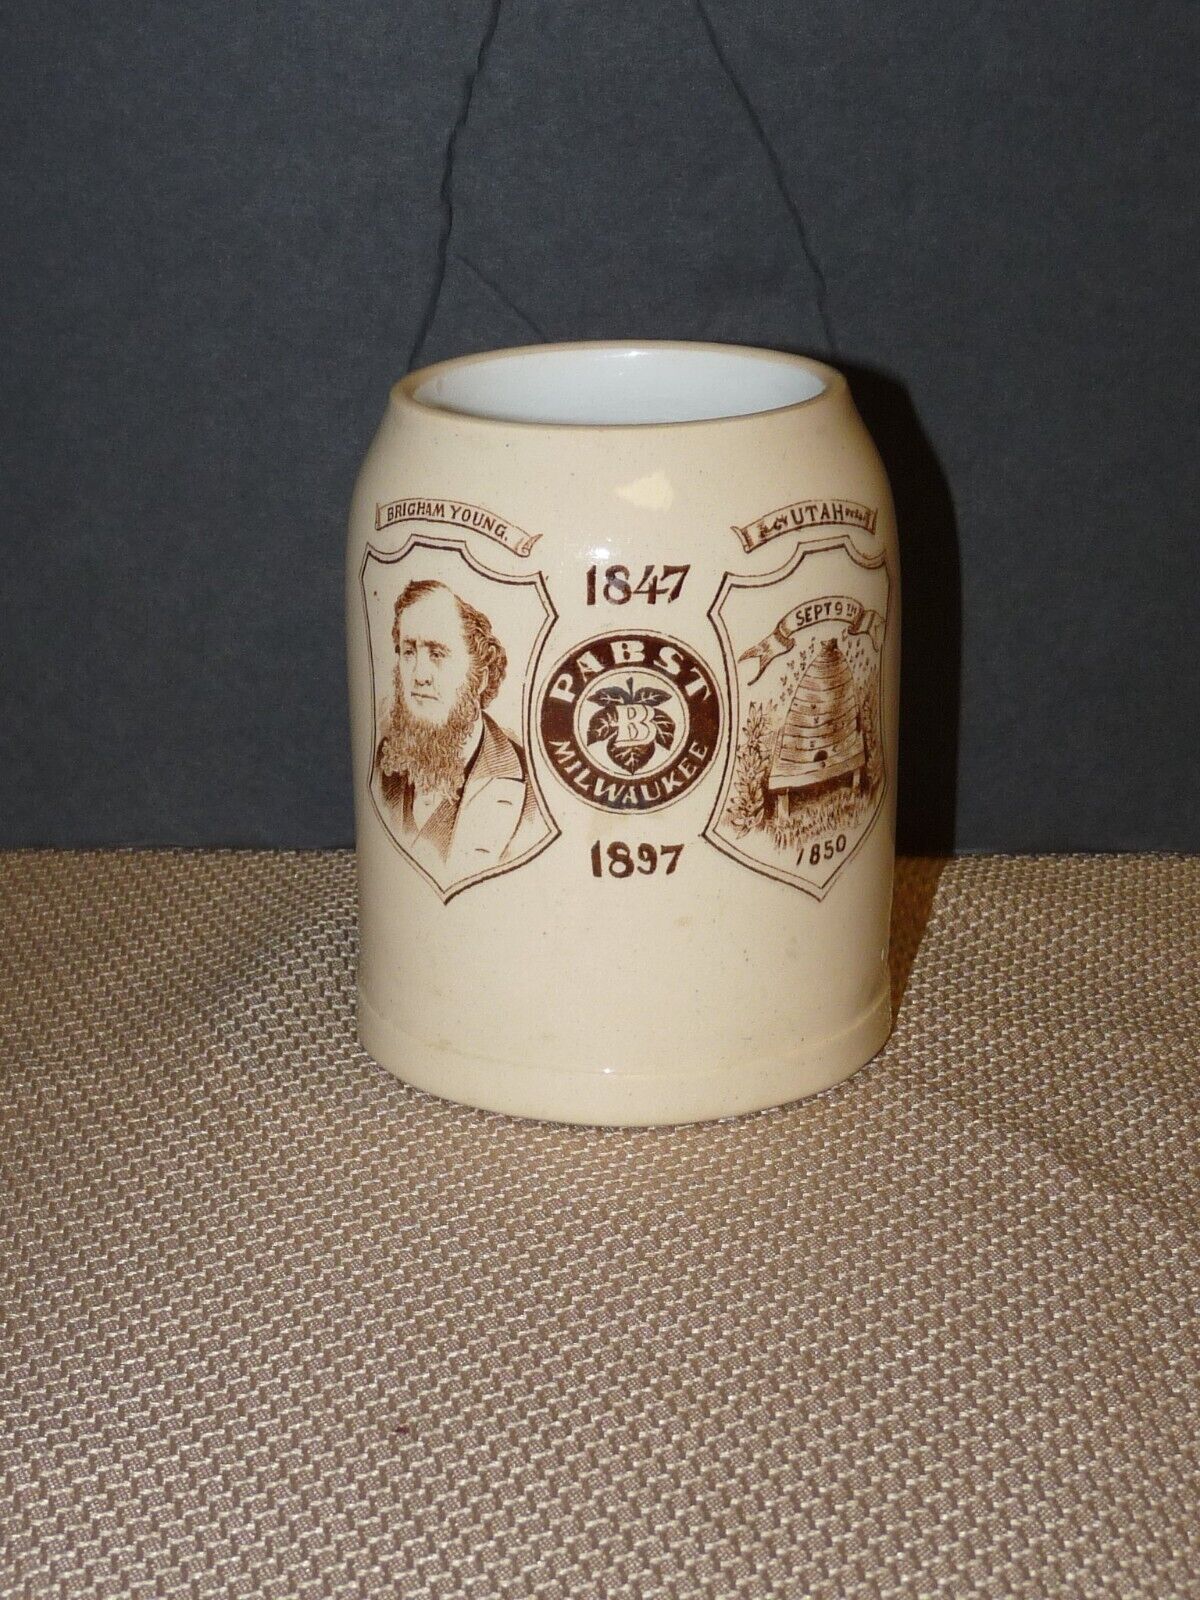 1897 PABST BEER MORMON BRIGHAM YOUNG JUBILEE MUG 1847 To 1897